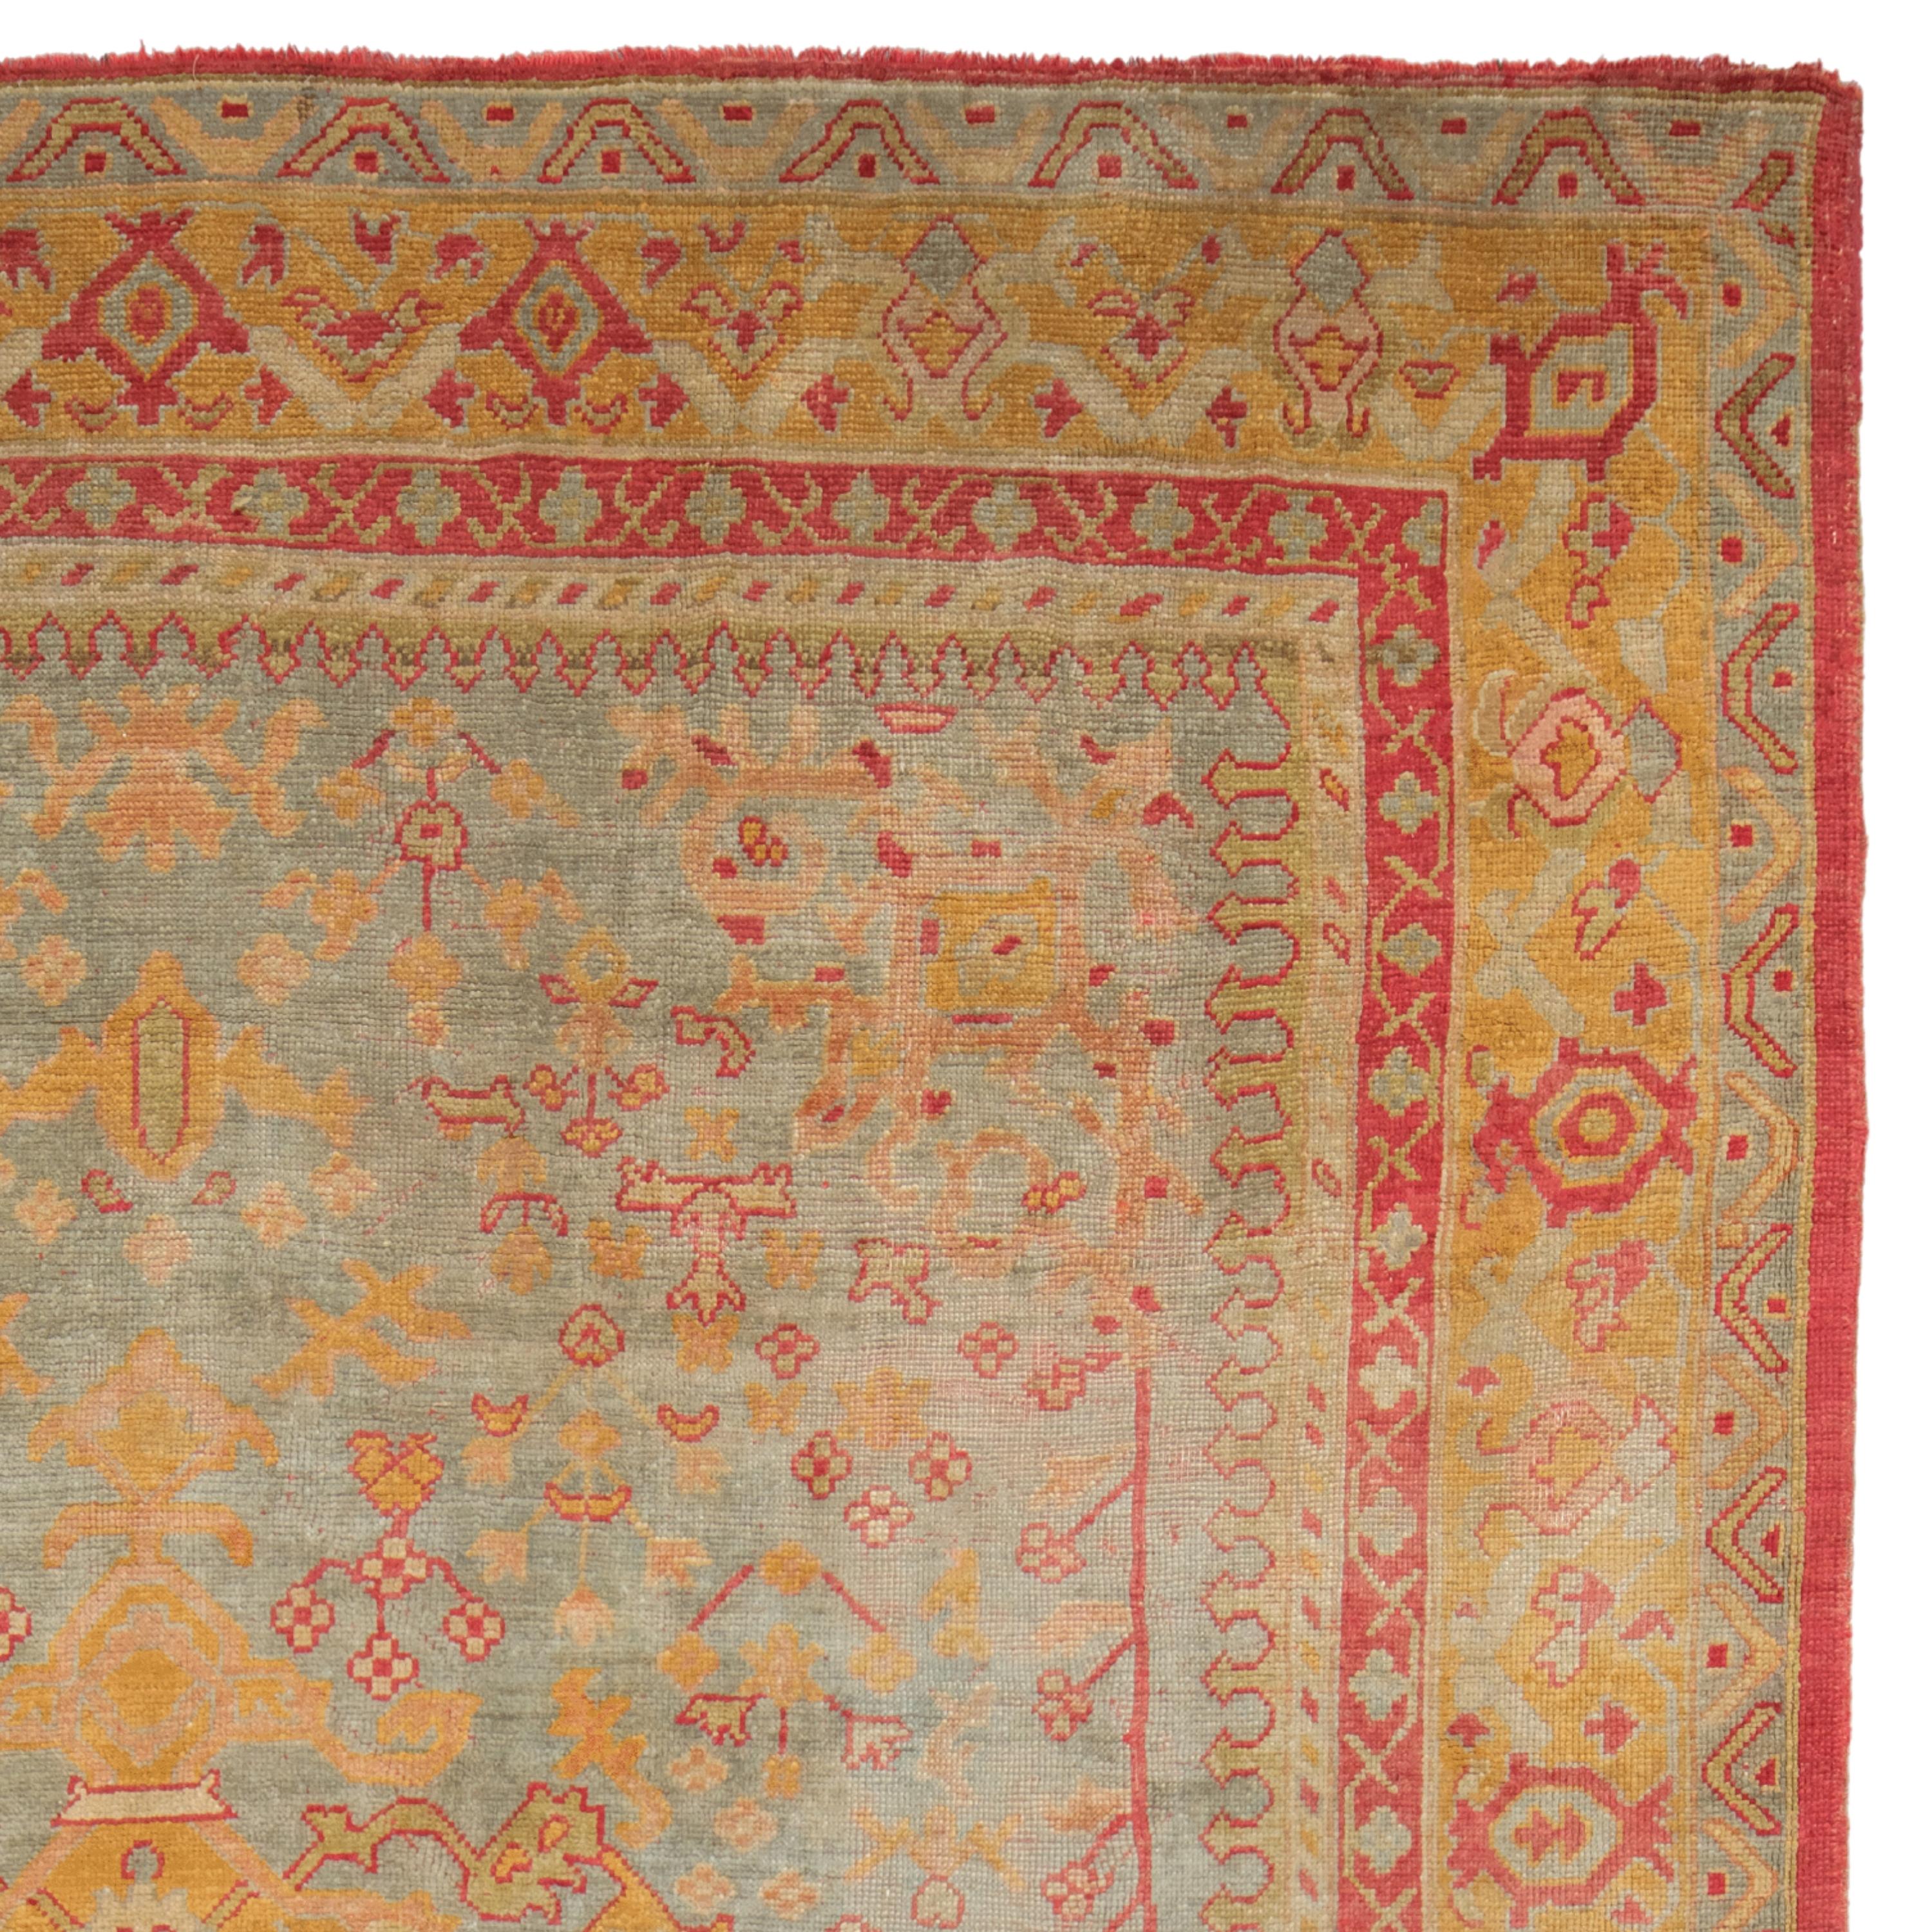 Wool Antique Oushak Rug - Late of 19th Century Turkish Oushak Rug, Antique Rug For Sale